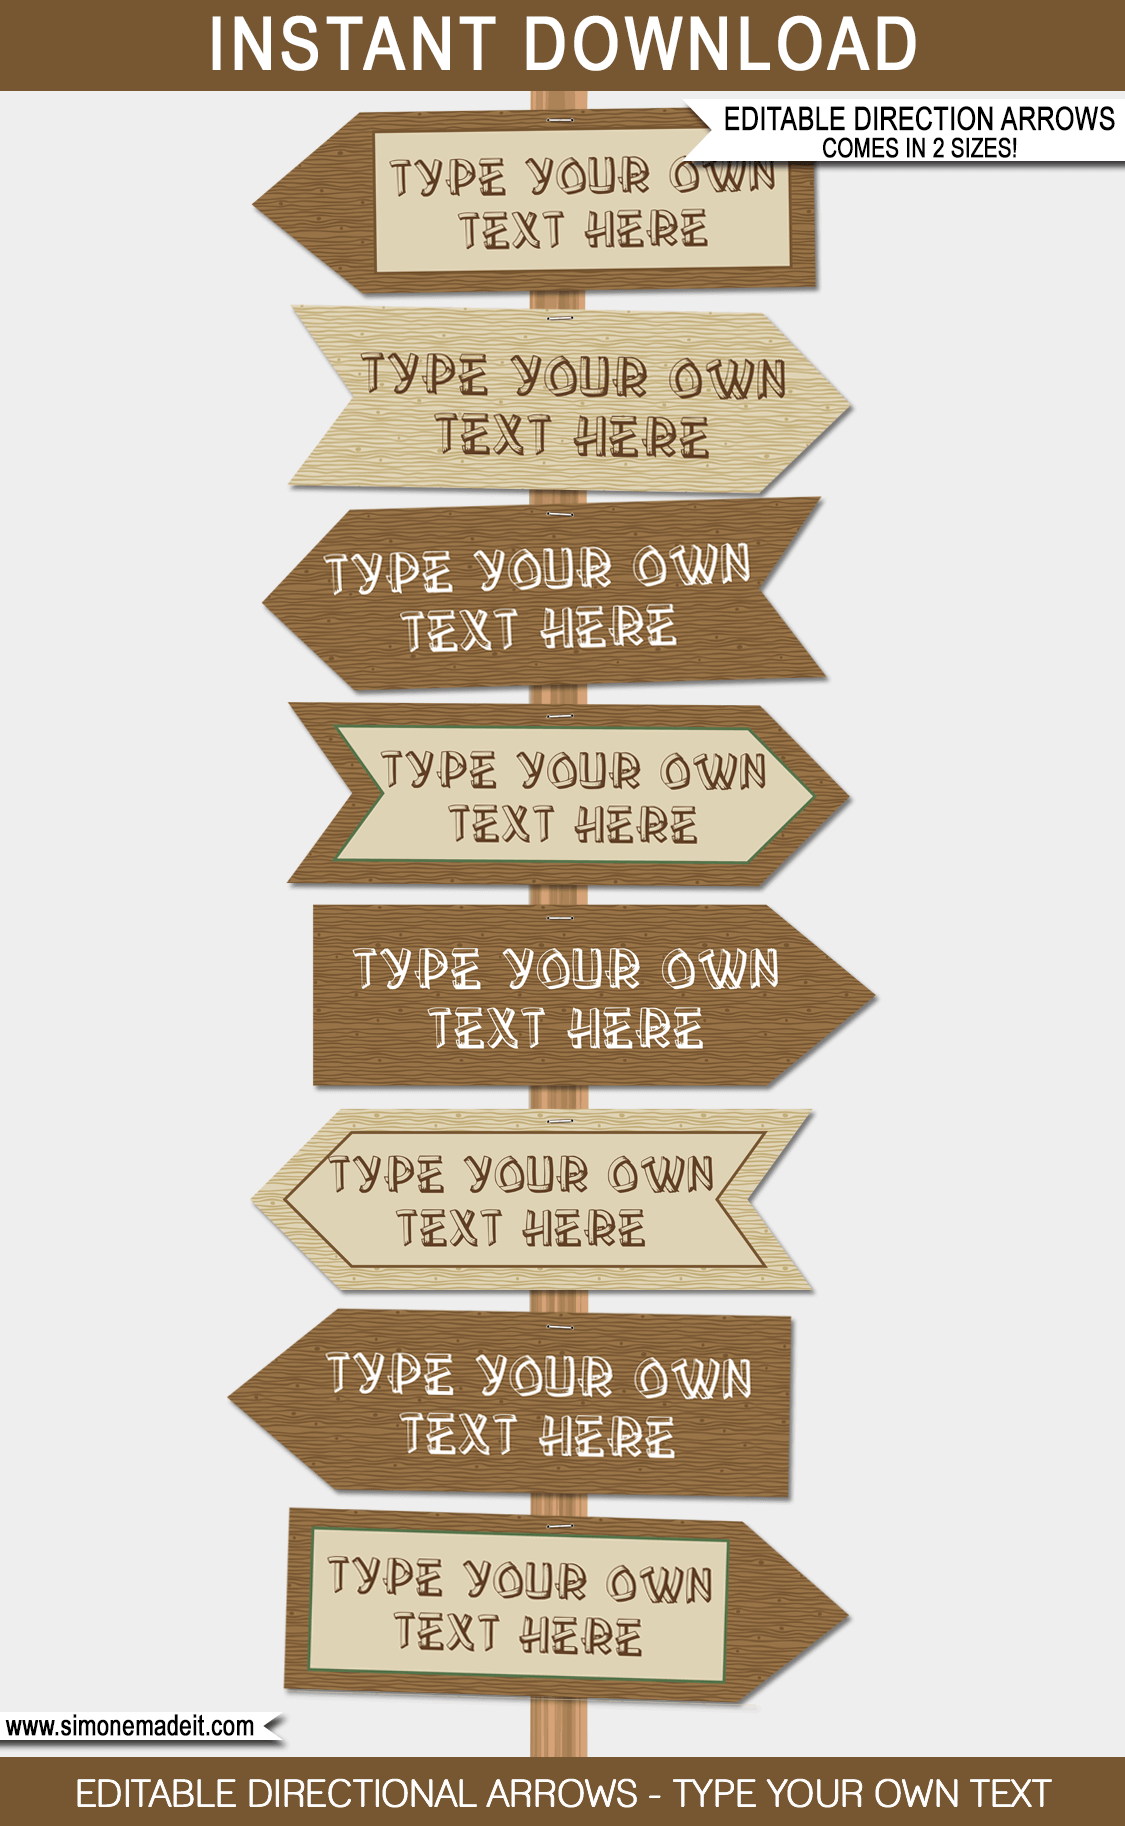 Camping Party Directional Signs | Arrows | Campout Birthday Party | Party Decorations | DIY Editable Templates | Ledger 11x17 inches | A3 | $4.50 via SIMONEmadeit.com